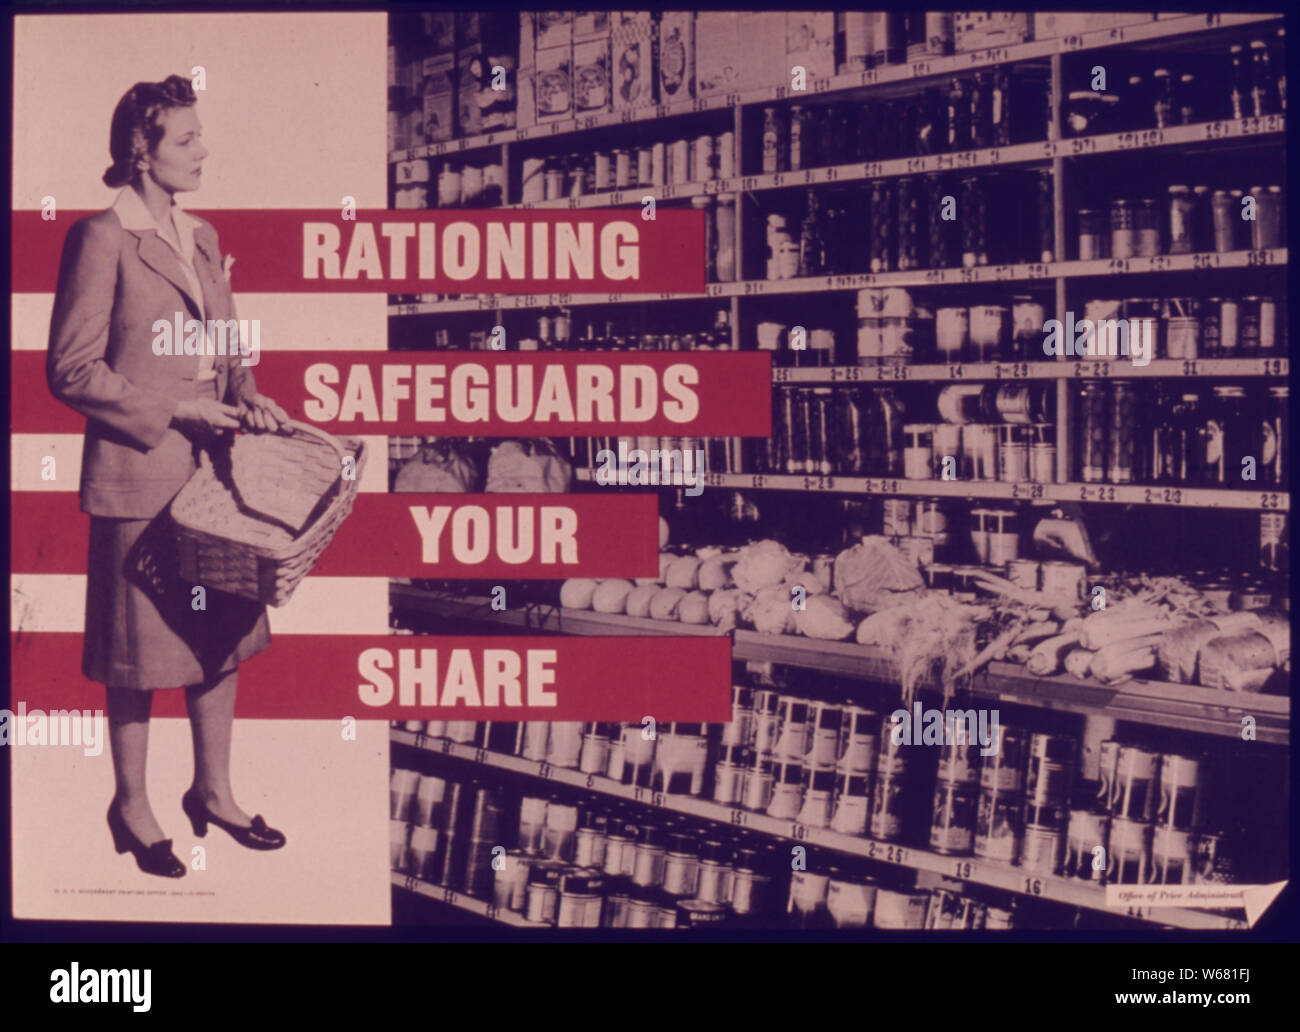 RATIONING SAFEGUARDS YOUR SHARE Stock Photo